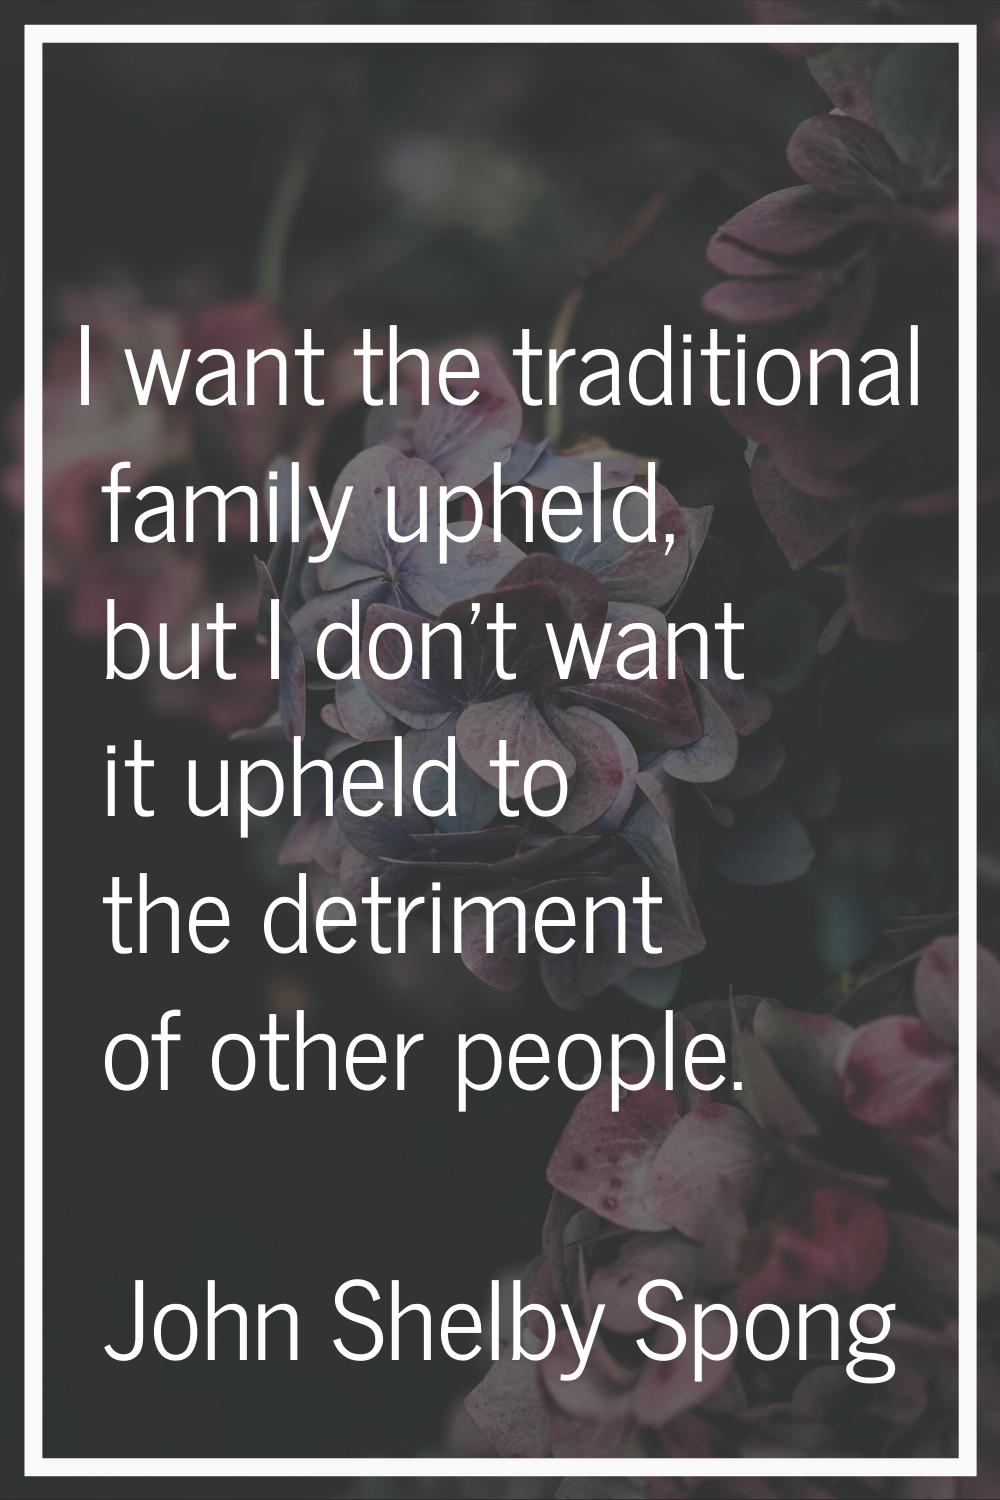 I want the traditional family upheld, but I don't want it upheld to the detriment of other people.